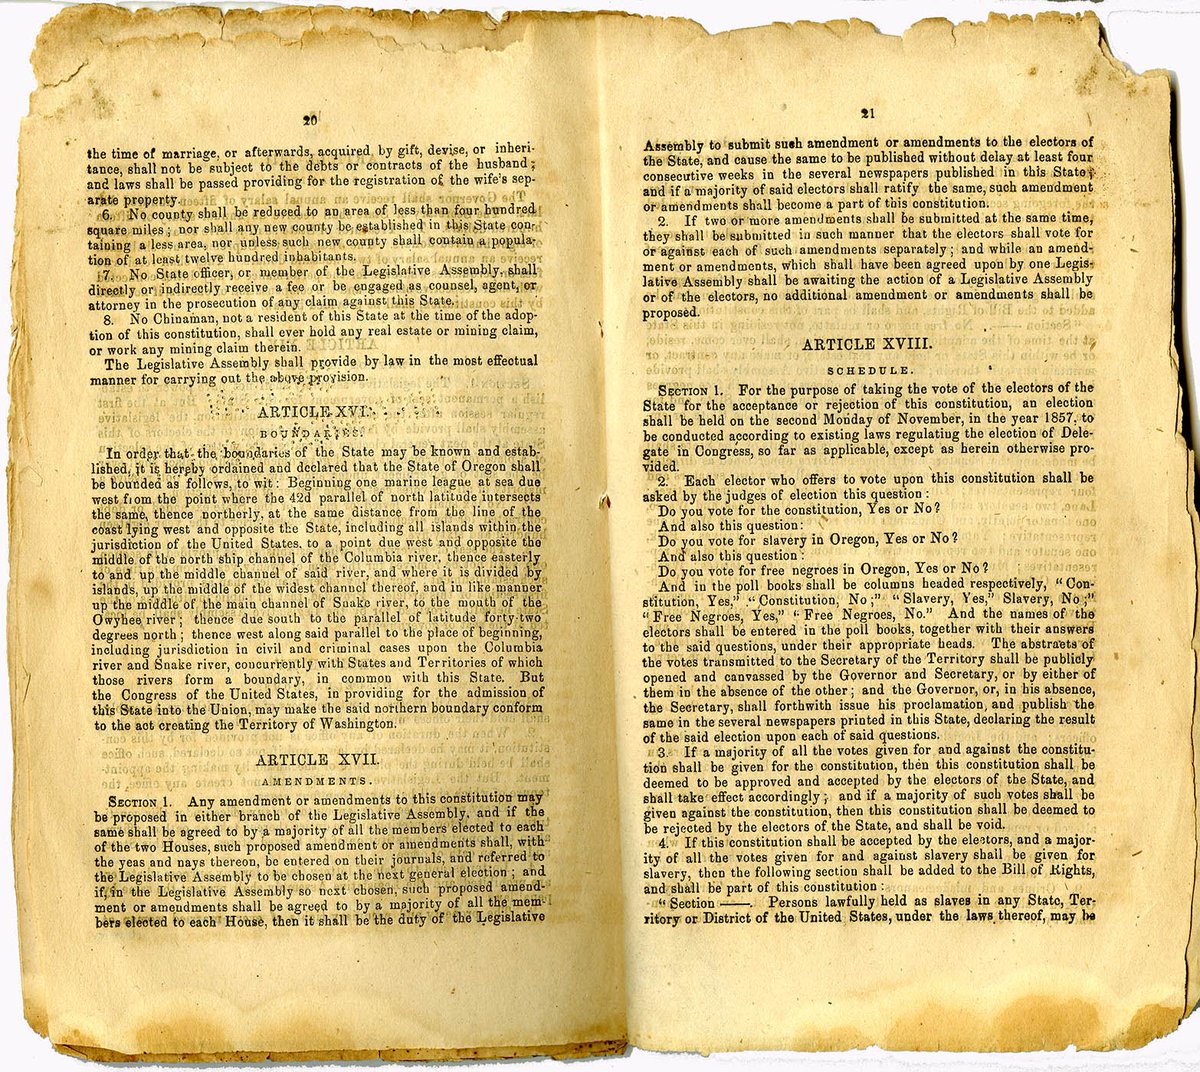 When the state was accepted into the union in 1859, the exclusion was codified in Oregon’s Constitution.